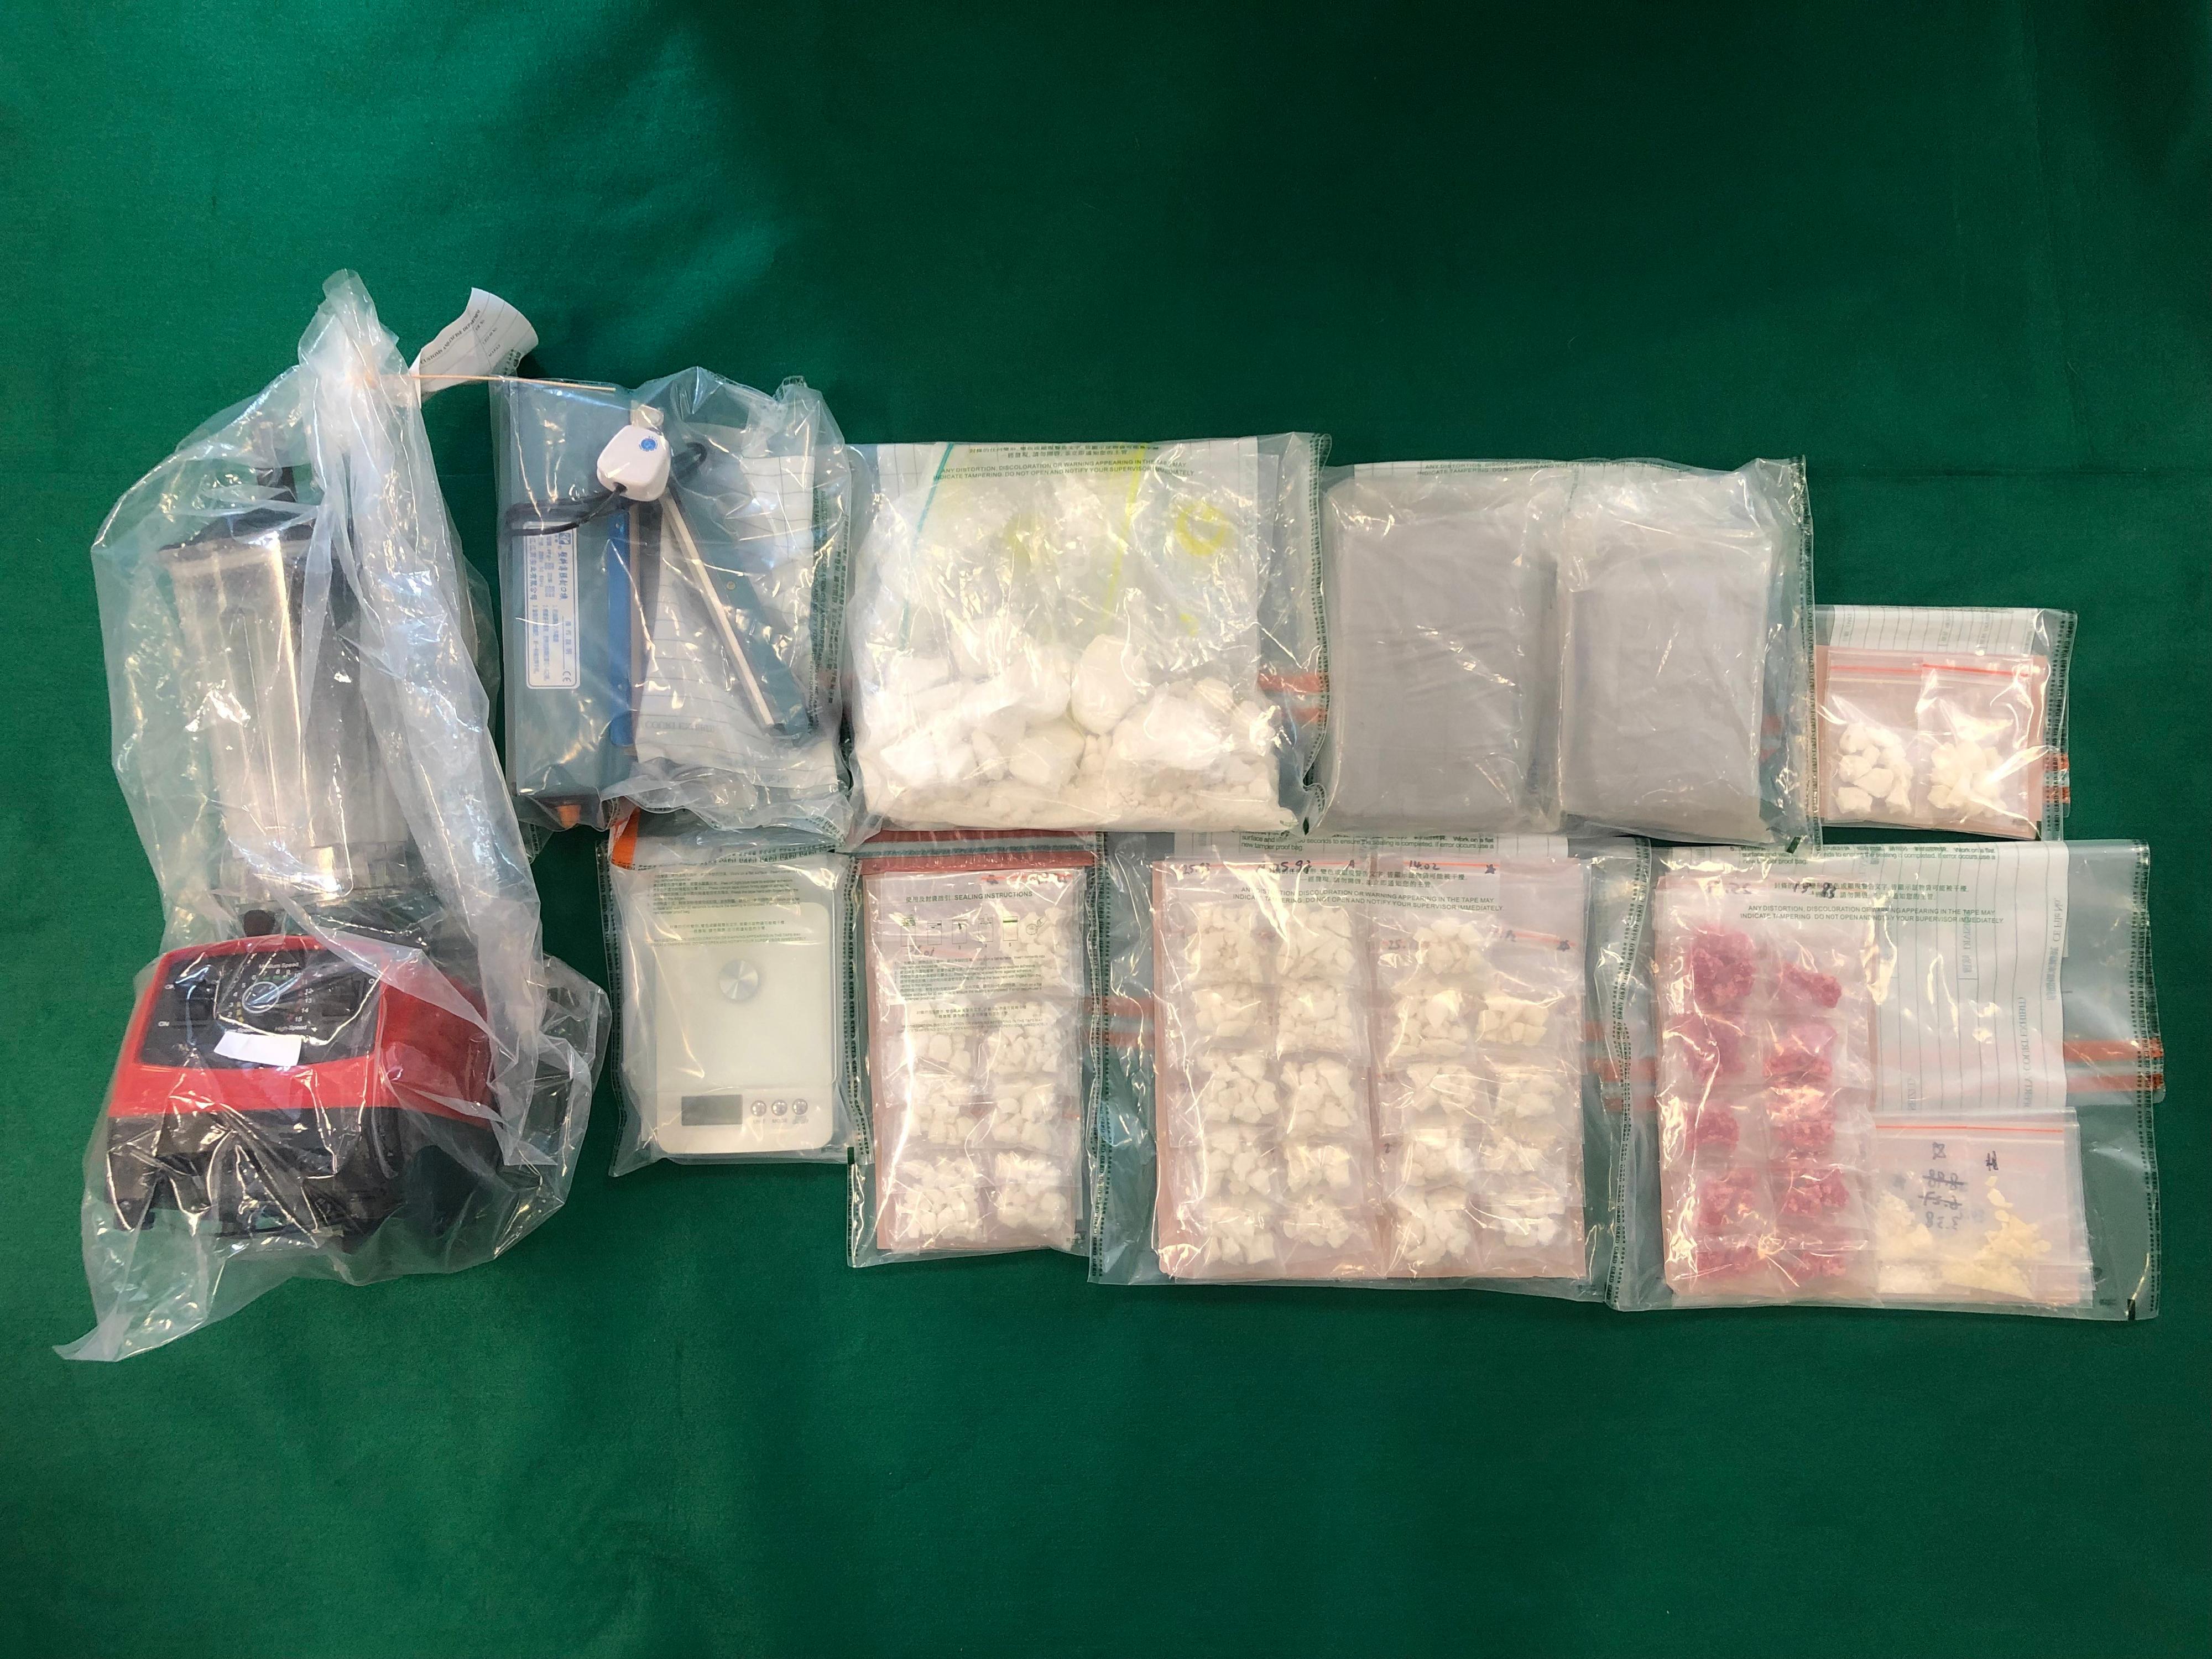 Hong Kong Customs yesterday (March 24) seized about 3.5 kilograms of suspected cocaine and about 450 grams of suspected crack cocaine with a total estimated market value of about $3.8 million in Tai Wai. Photo shows the suspected cocaine, suspected crack cocaine and drug manufacturing and packaging paraphernalia seized.